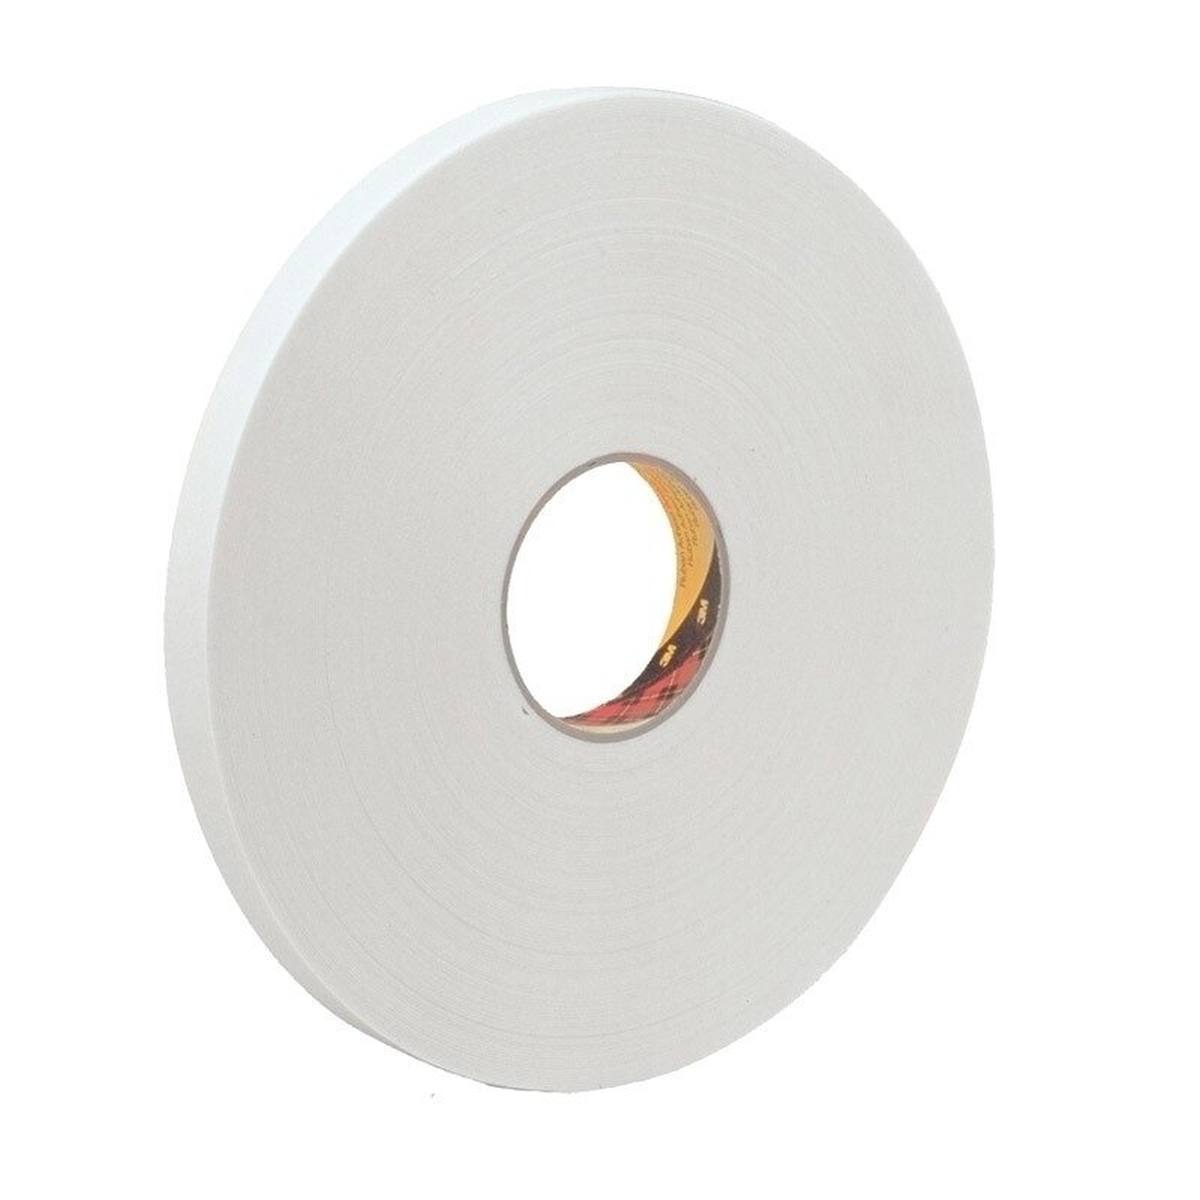 3M PE foam adhesive tape with acrylic adhesive 9539, white, 15 mm x 66 m, 0.8 mm